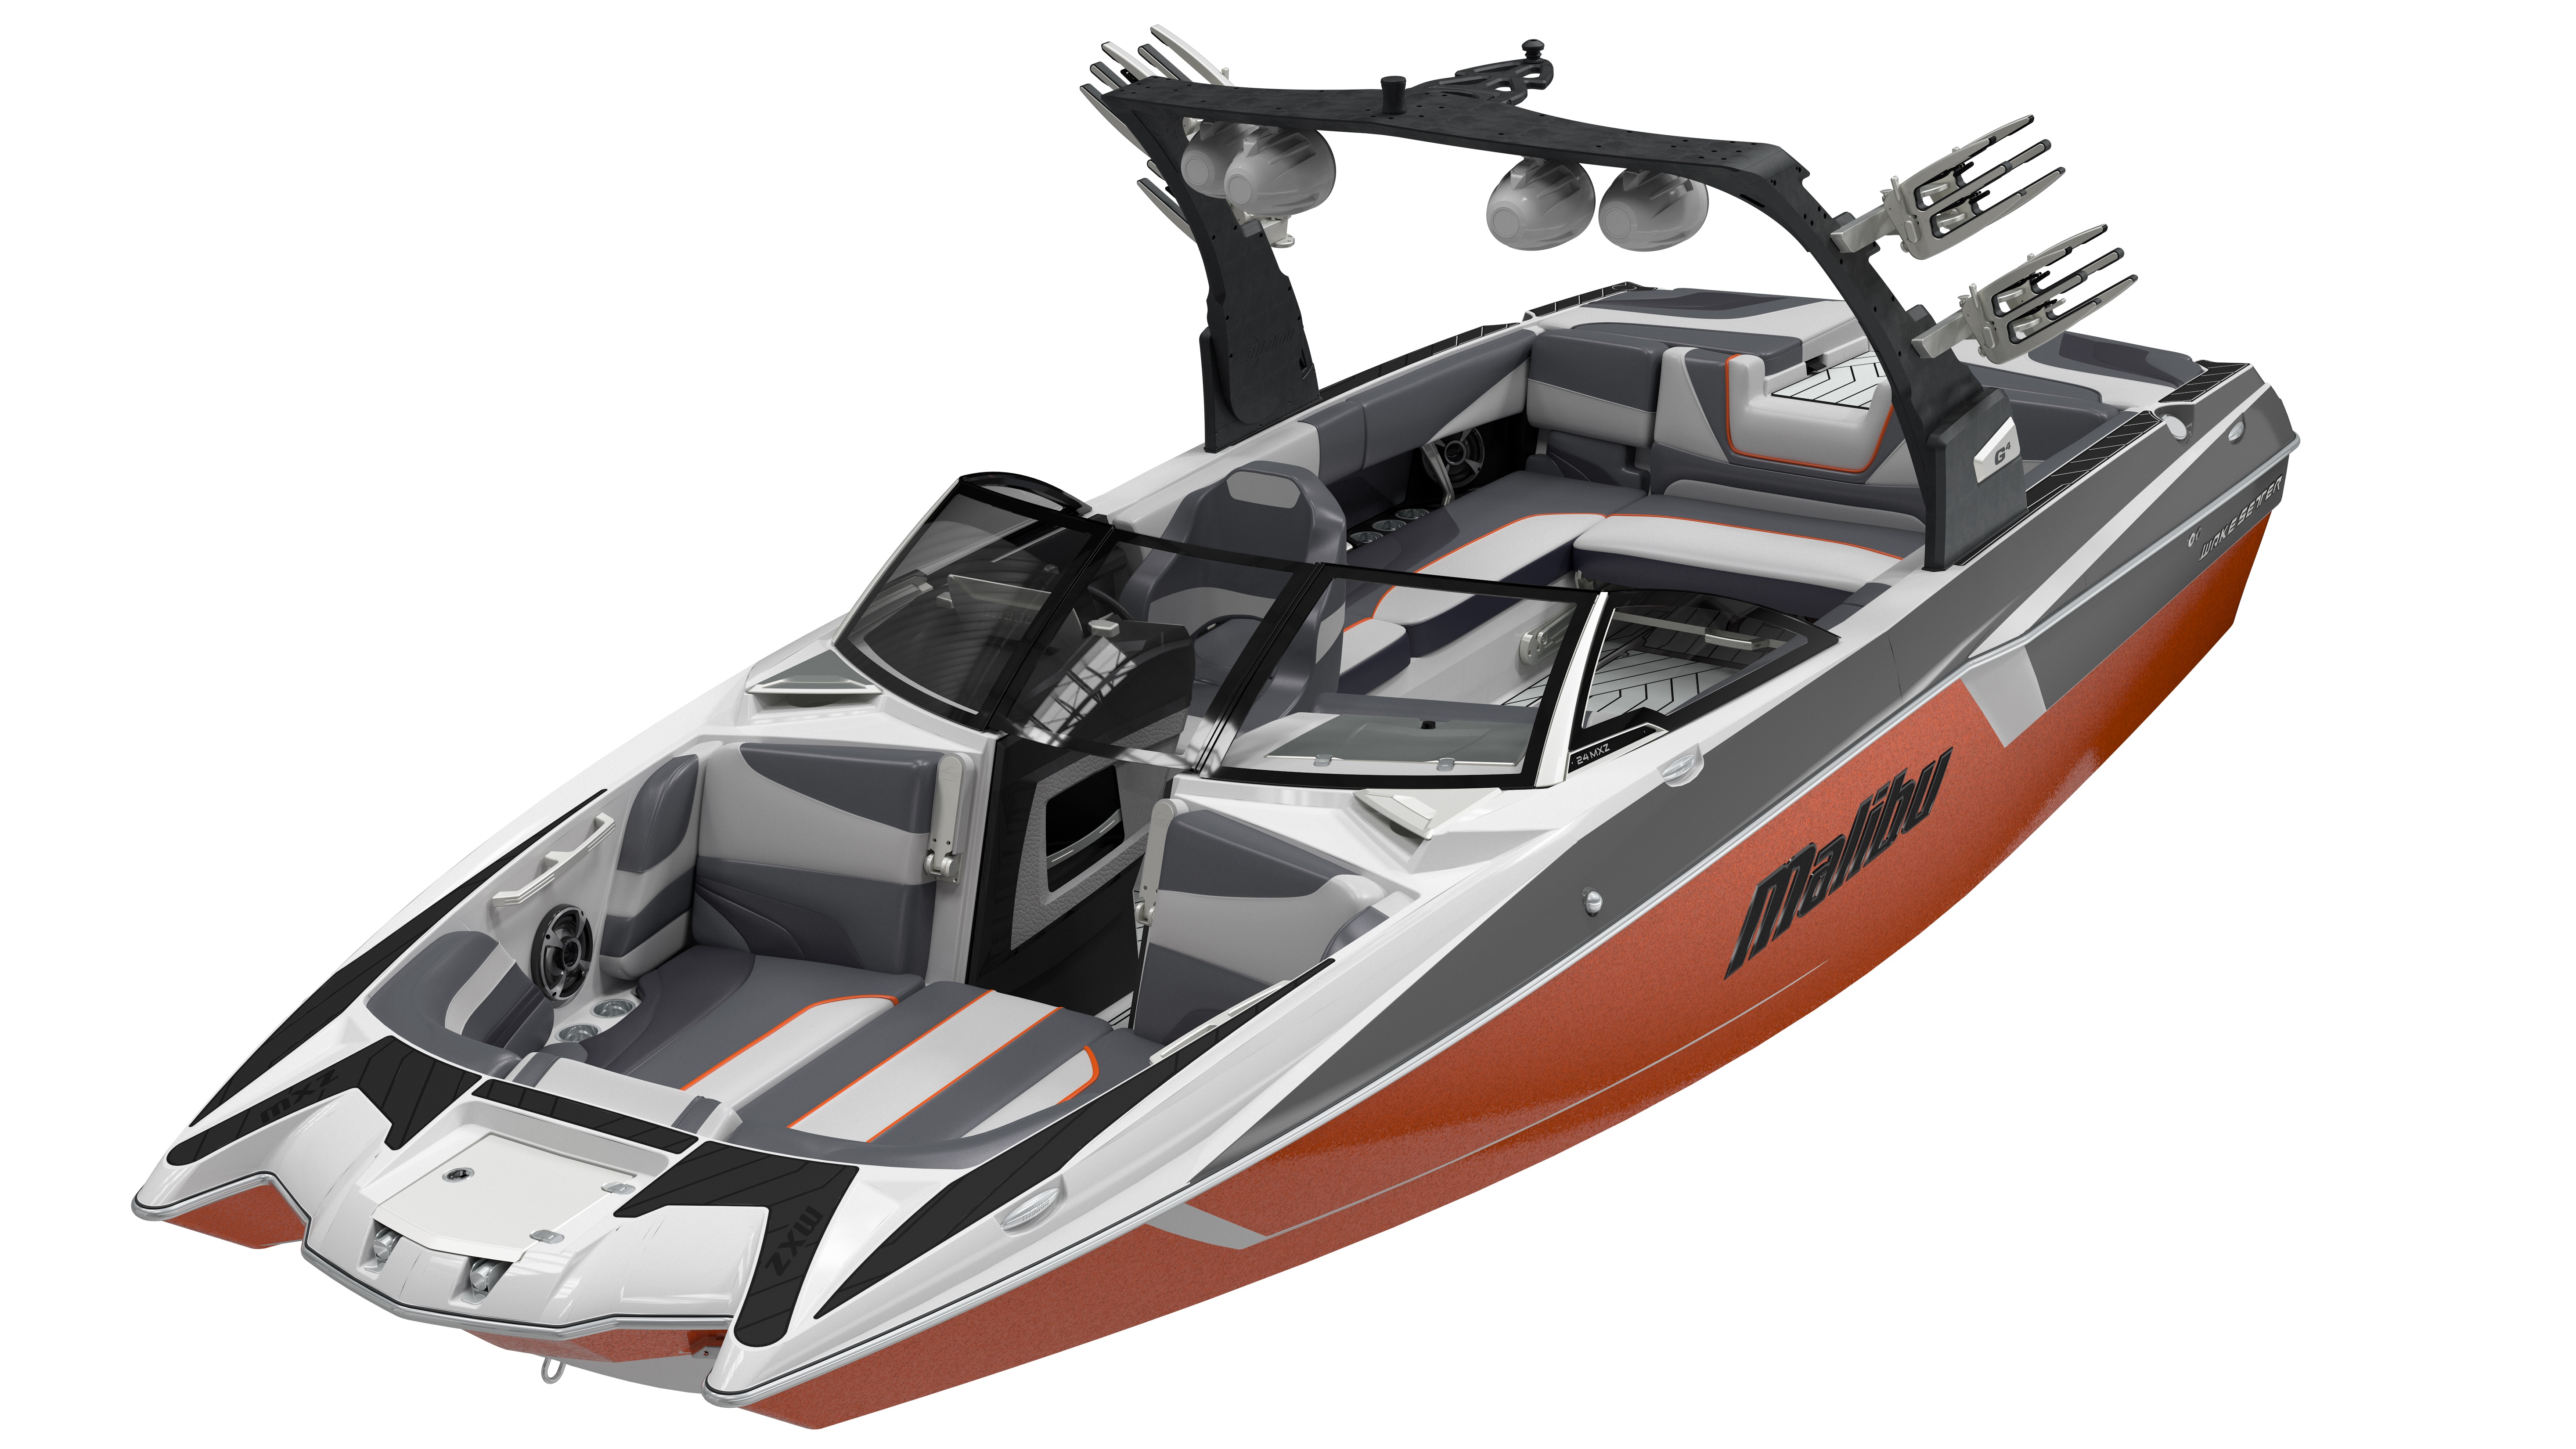 Malibu Wakesetter 24 MXZ Prices, Specs, Reviews and Sales Information